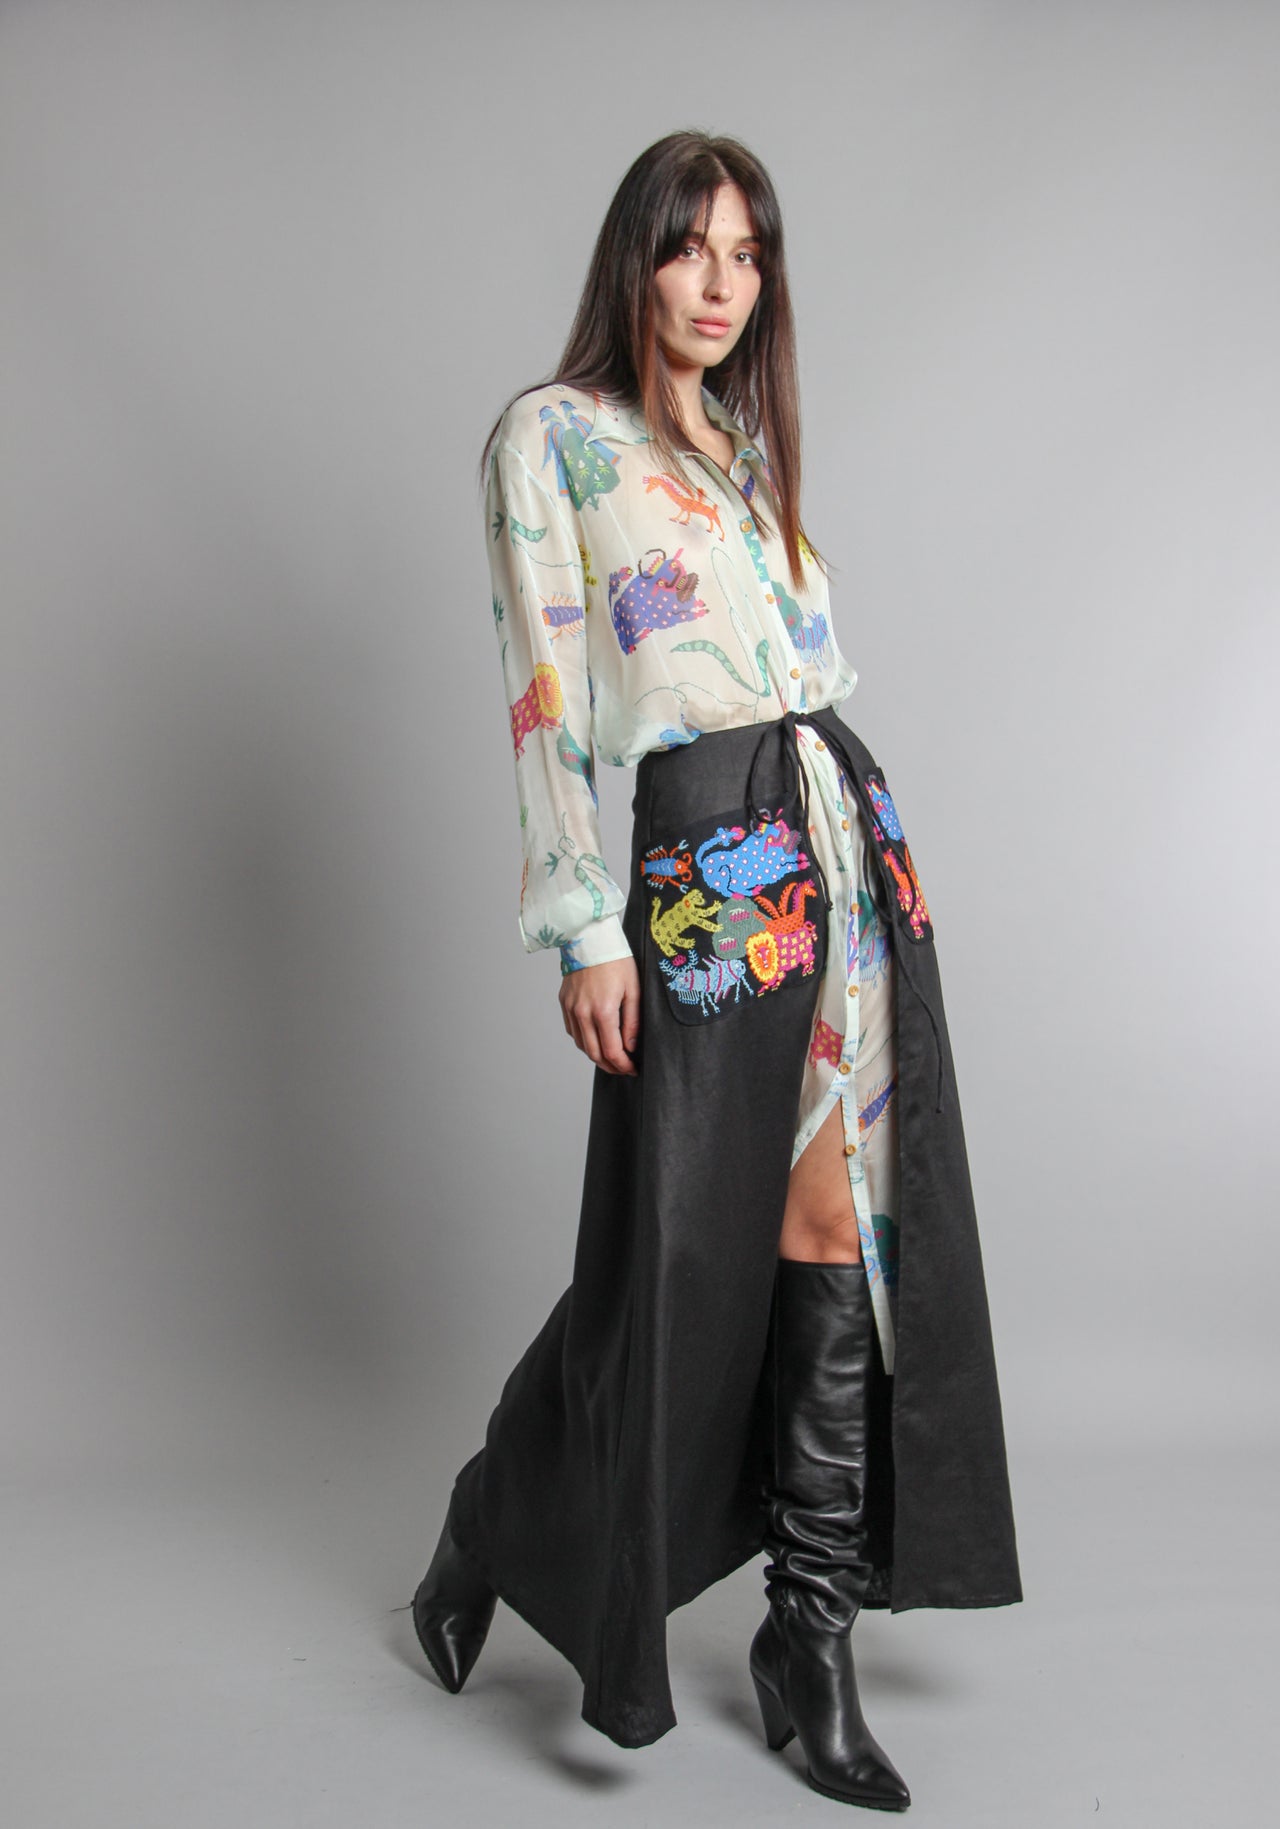 Wrap skirt with embroidered pockets